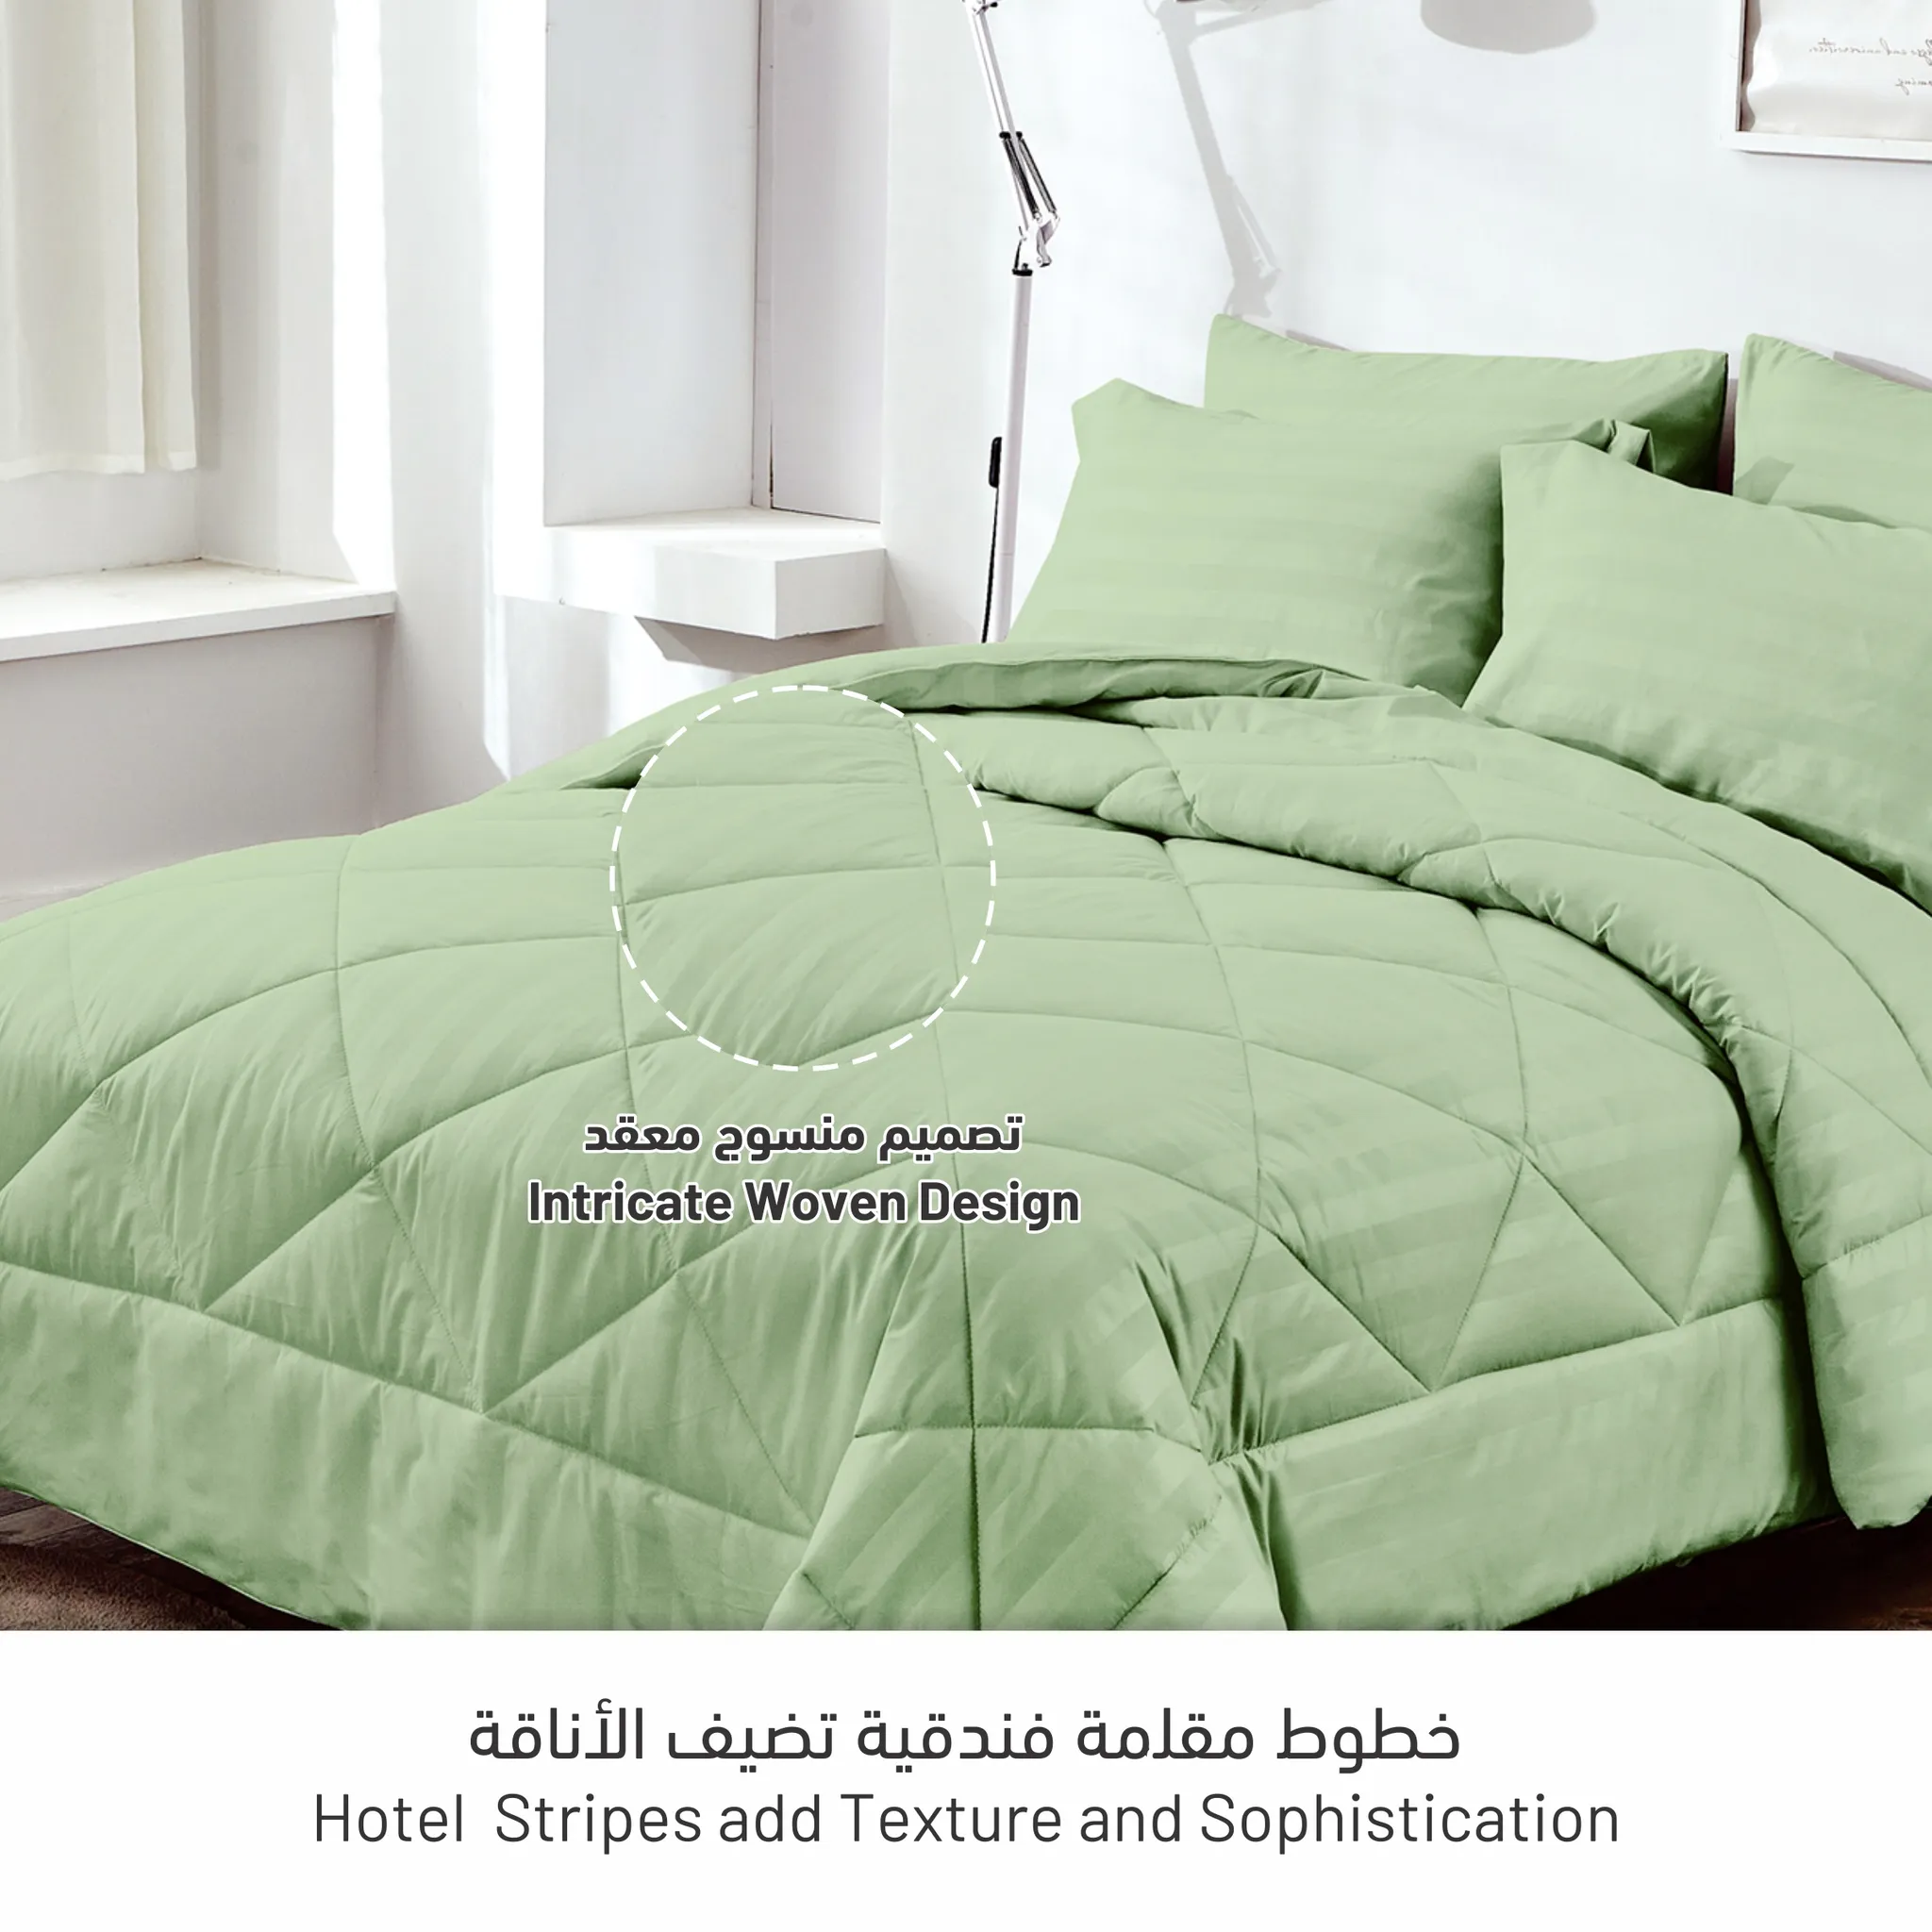 6-Piece Damask Stripes Hotel Style Comforter Microfiber ,Quilted ,King 260 x 240 Cms ,Sage